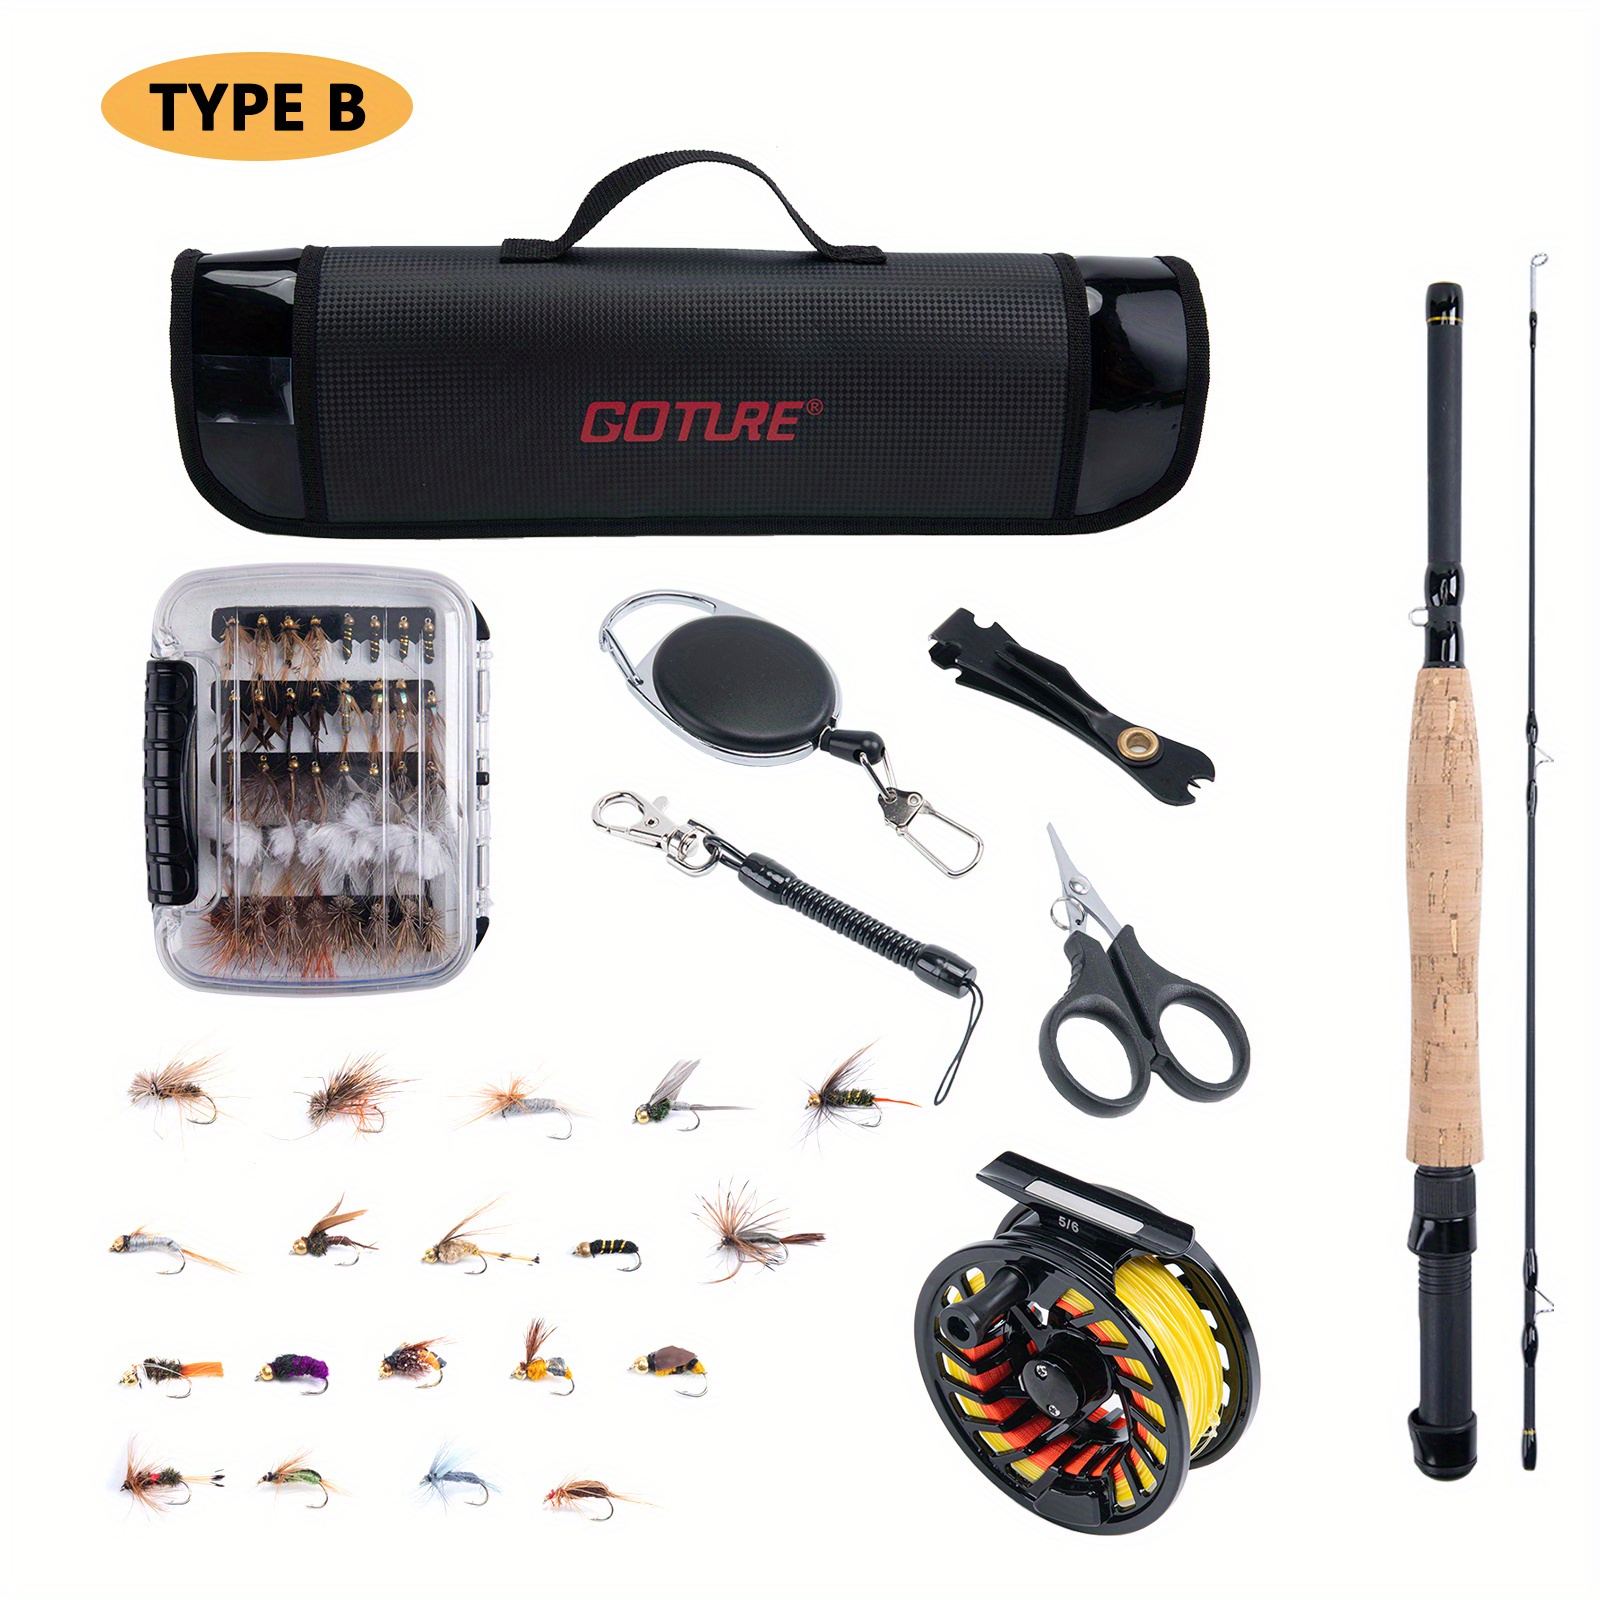 Goture Fly Fishing Rod Combo 2.7m 5/6 Fly Fishing Kit Include Carry bag  Metal Fly Reel with Dry Flies box for Fly Fishing